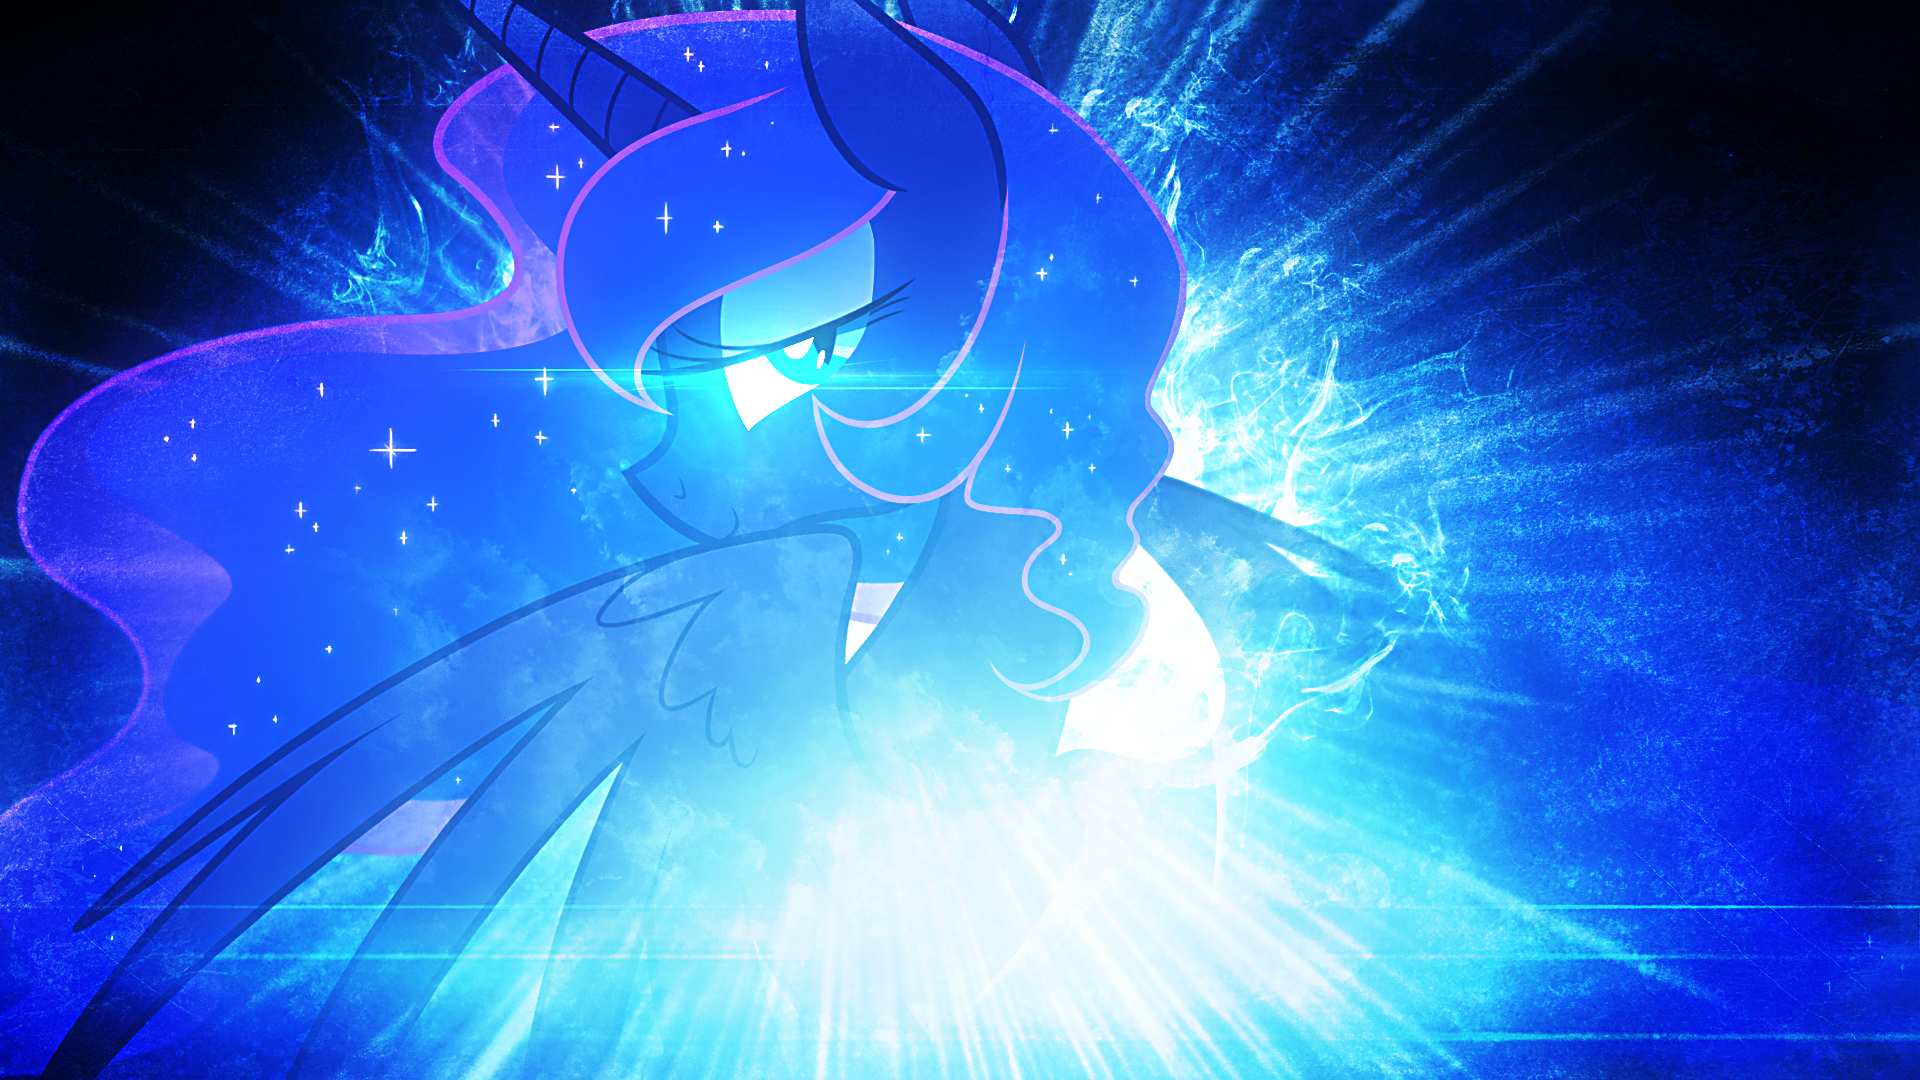 Royal Luna - Wallpaper by Equestria-Prevails and Tzolkine